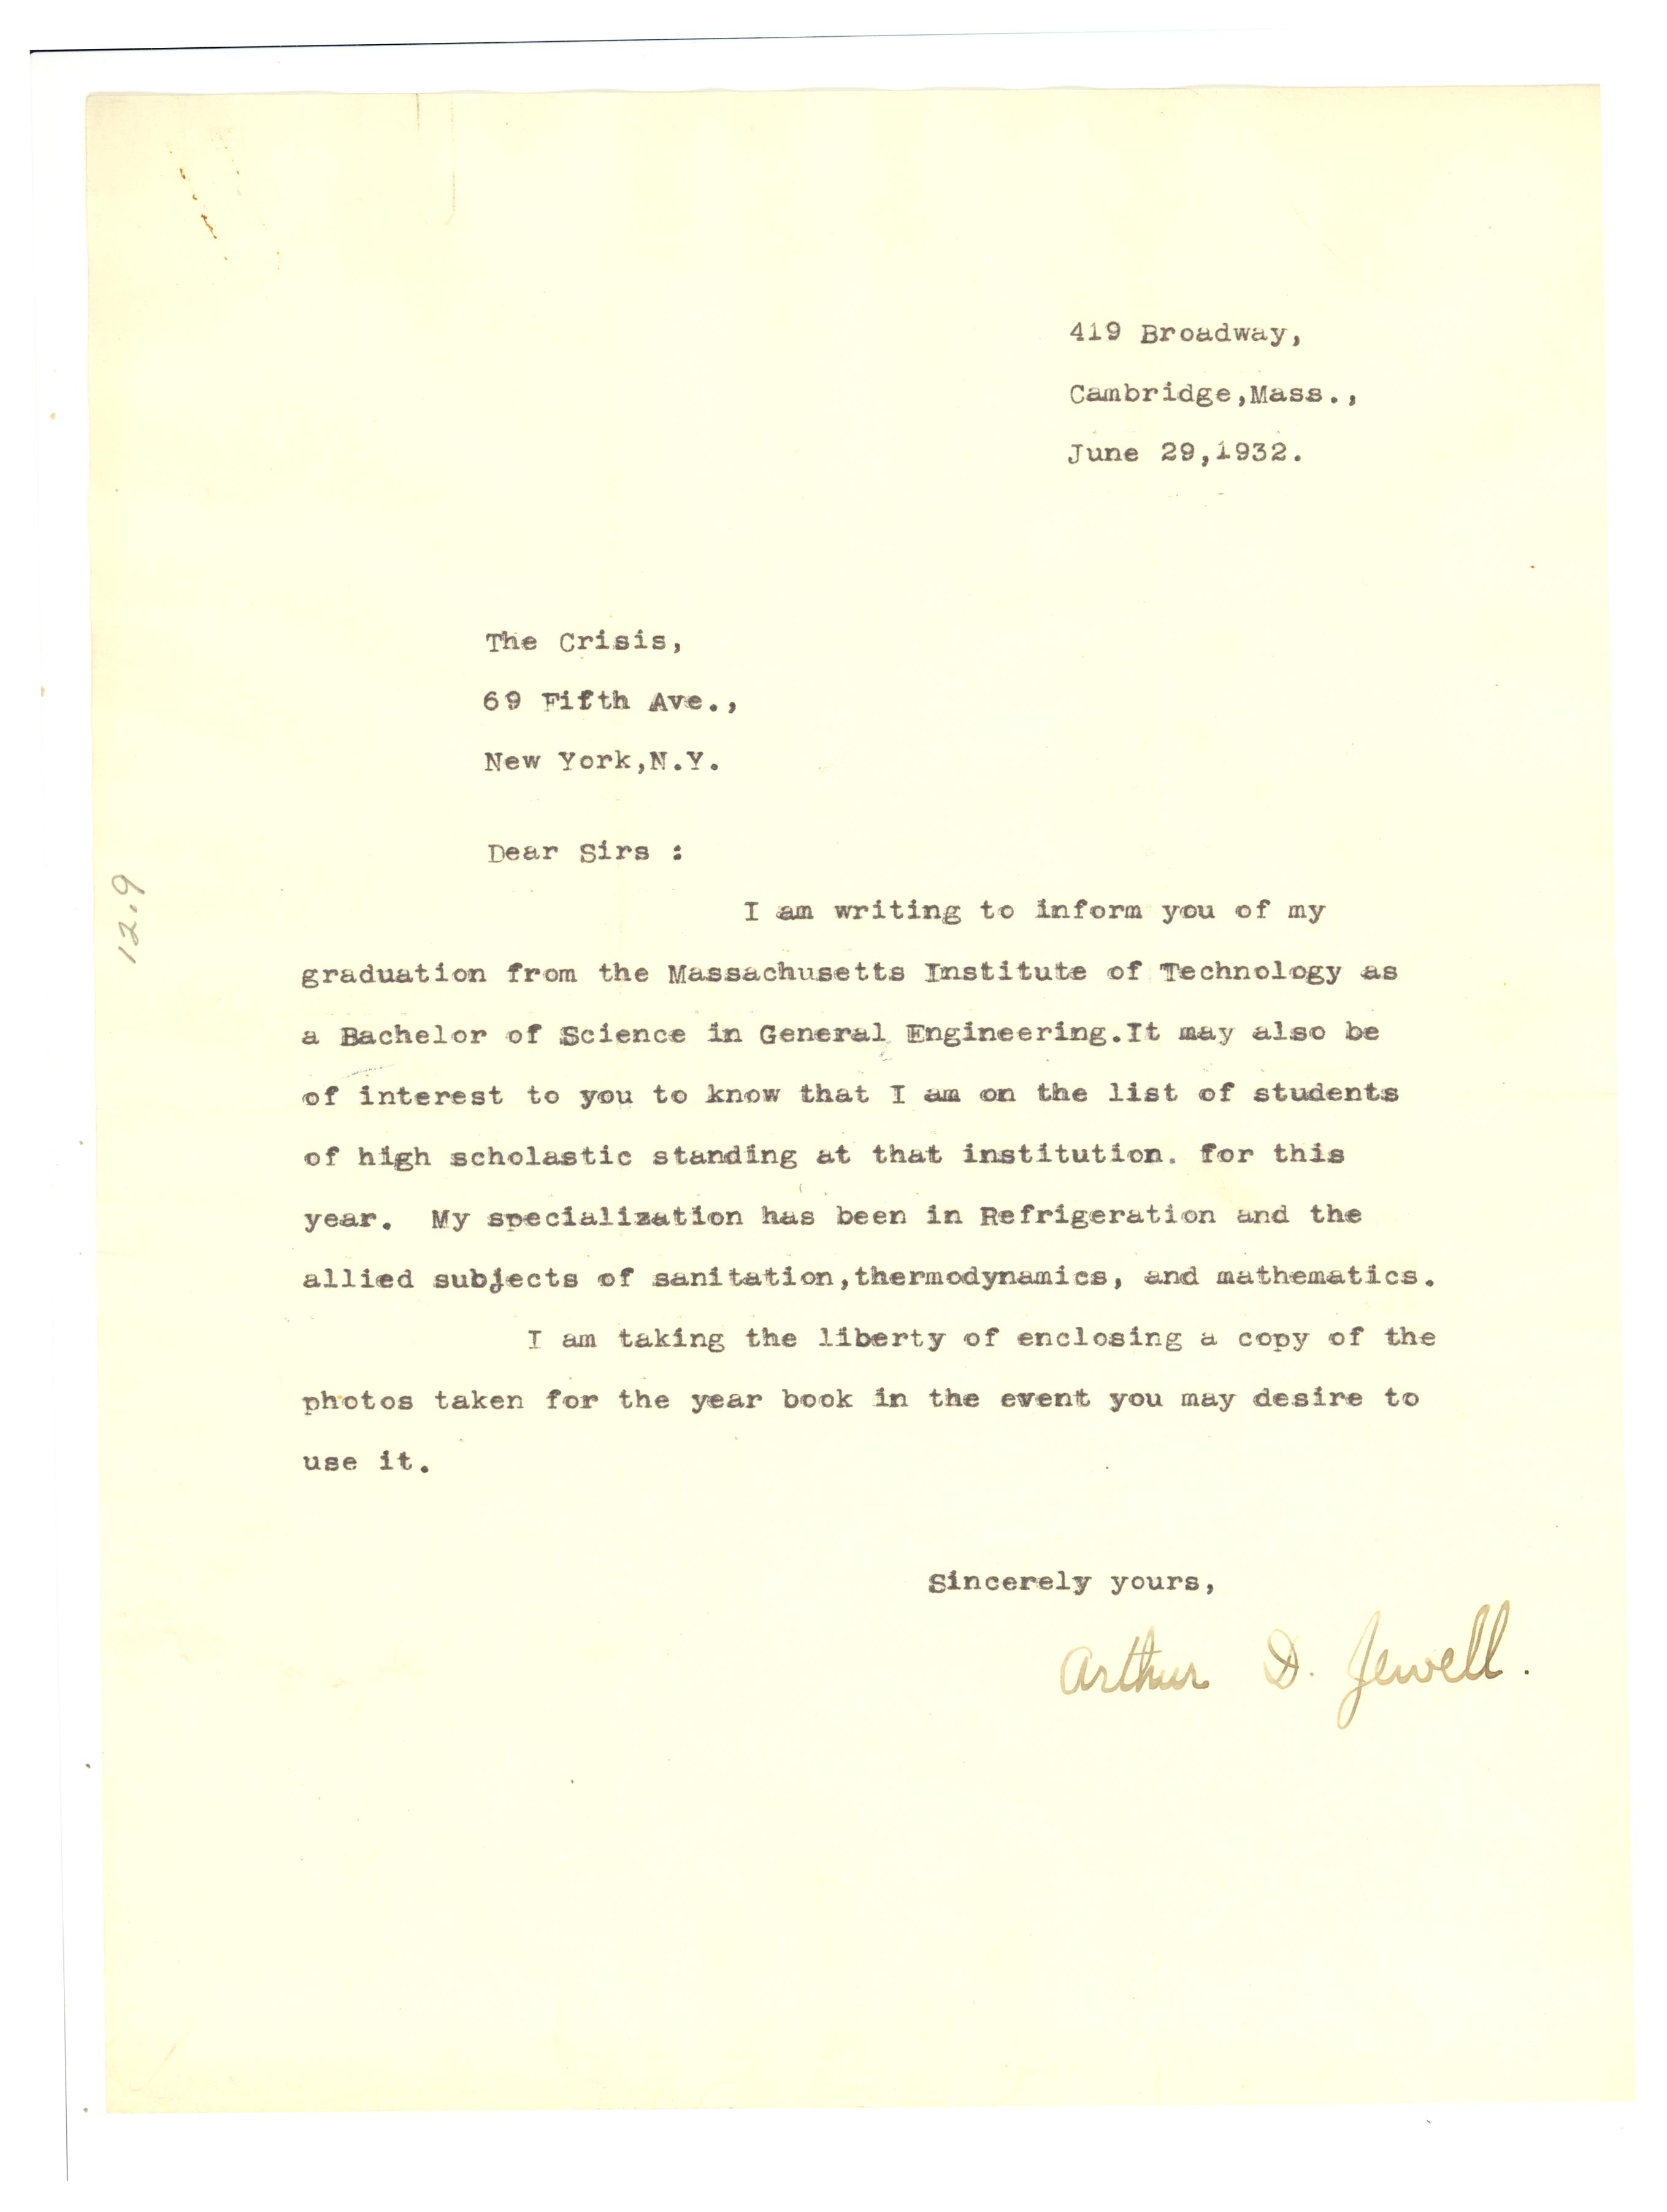 Letter from Arthur D. Jewell to The Crisis, 1932